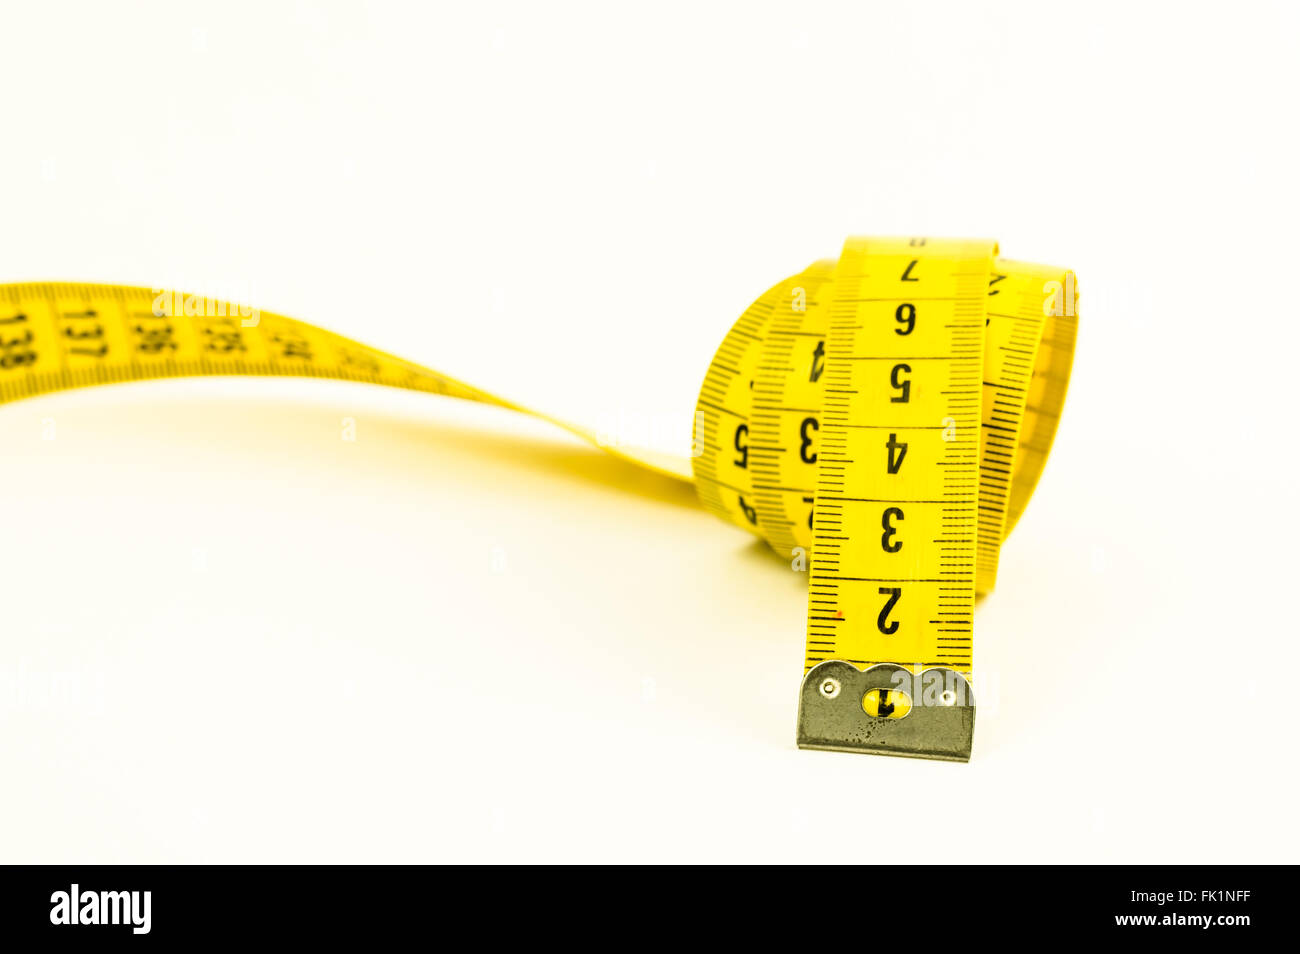 https://c8.alamy.com/comp/FK1NFF/still-life-with-a-yellow-tape-measure-and-a-pencil-over-white-FK1NFF.jpg